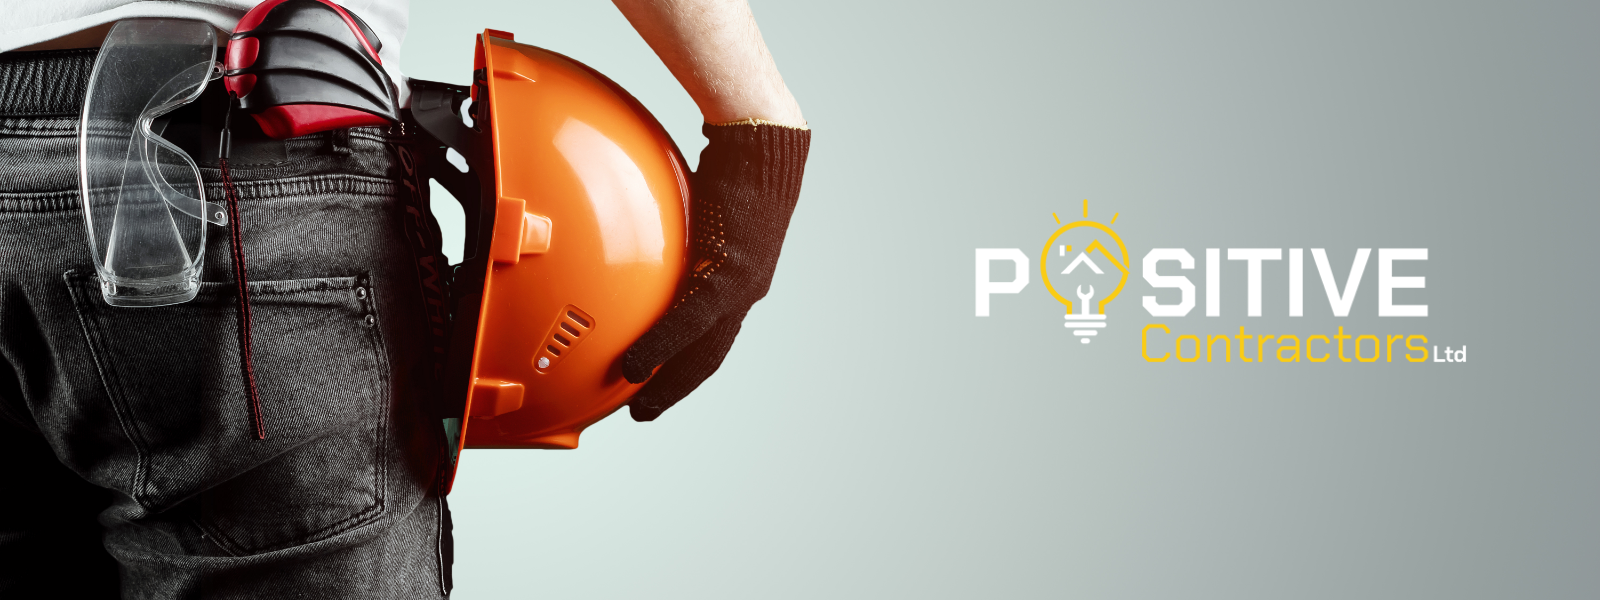 A man in a half-body holding an orange construction hat at the side of hips while in the left side, there is an icon of a bulb and a caption of Positive Contractors Ltd.